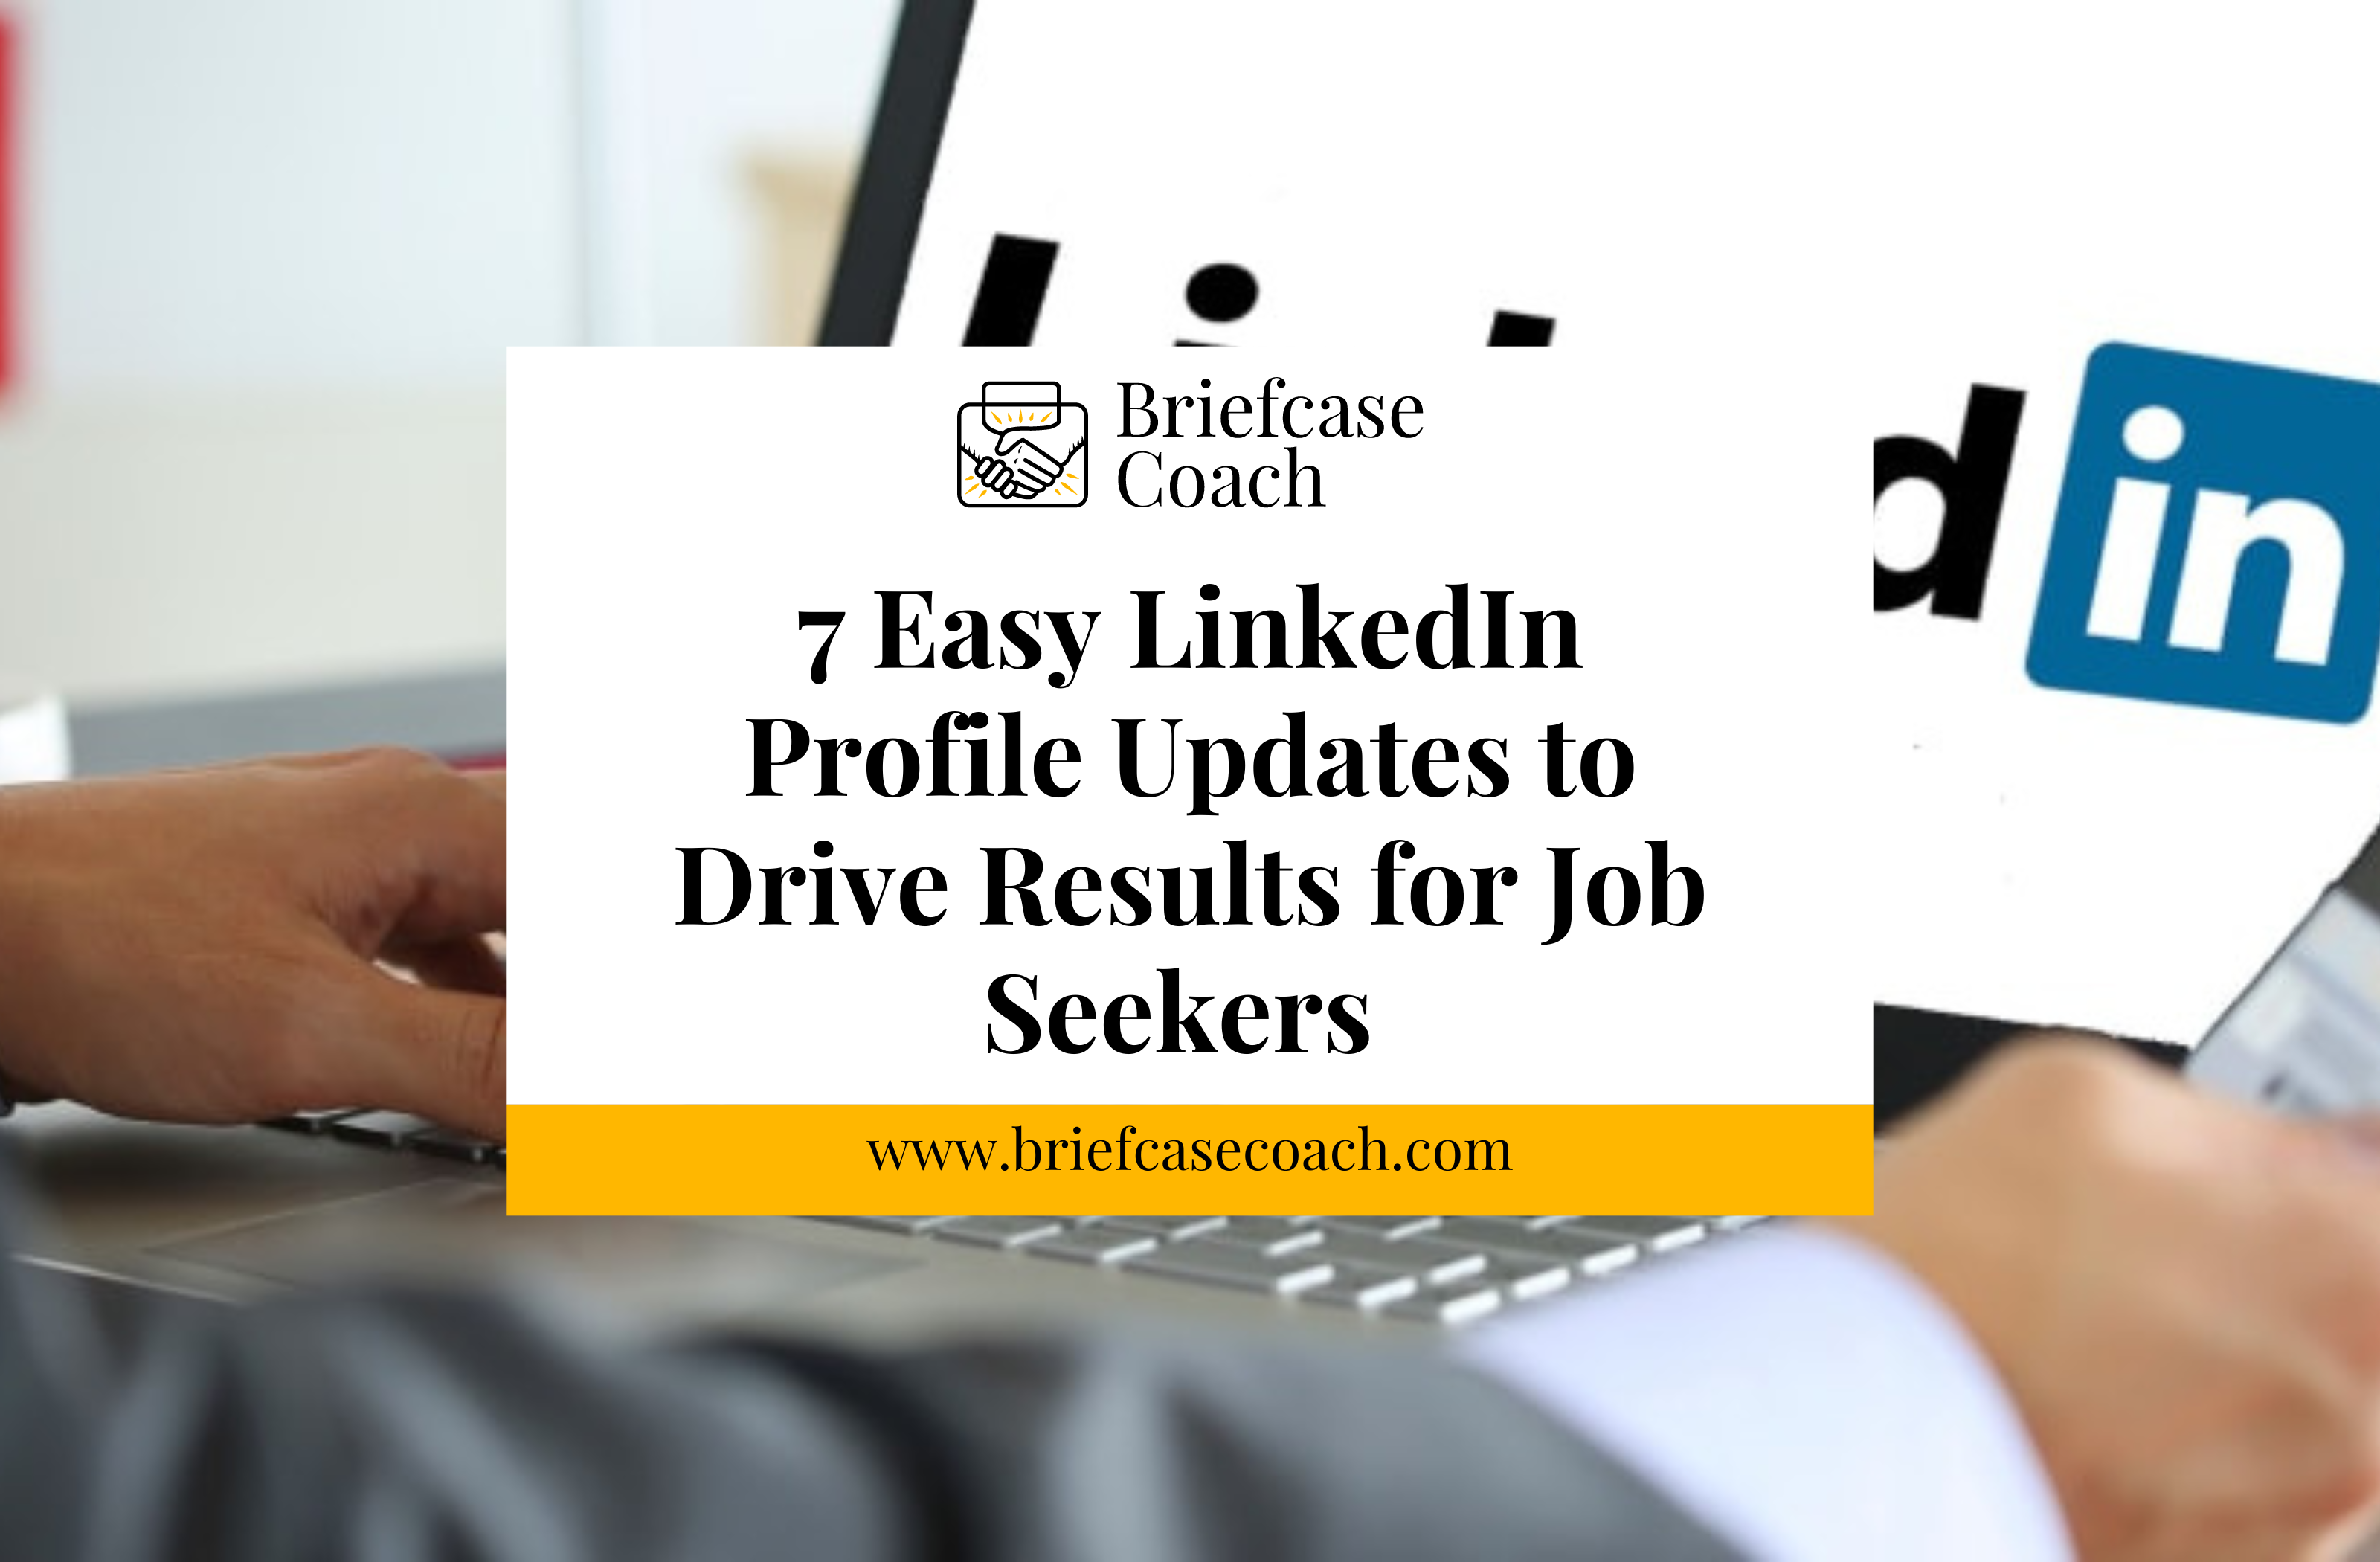 7 Easy LinkedIn Profile Updates to Drive Results for Job Seekers